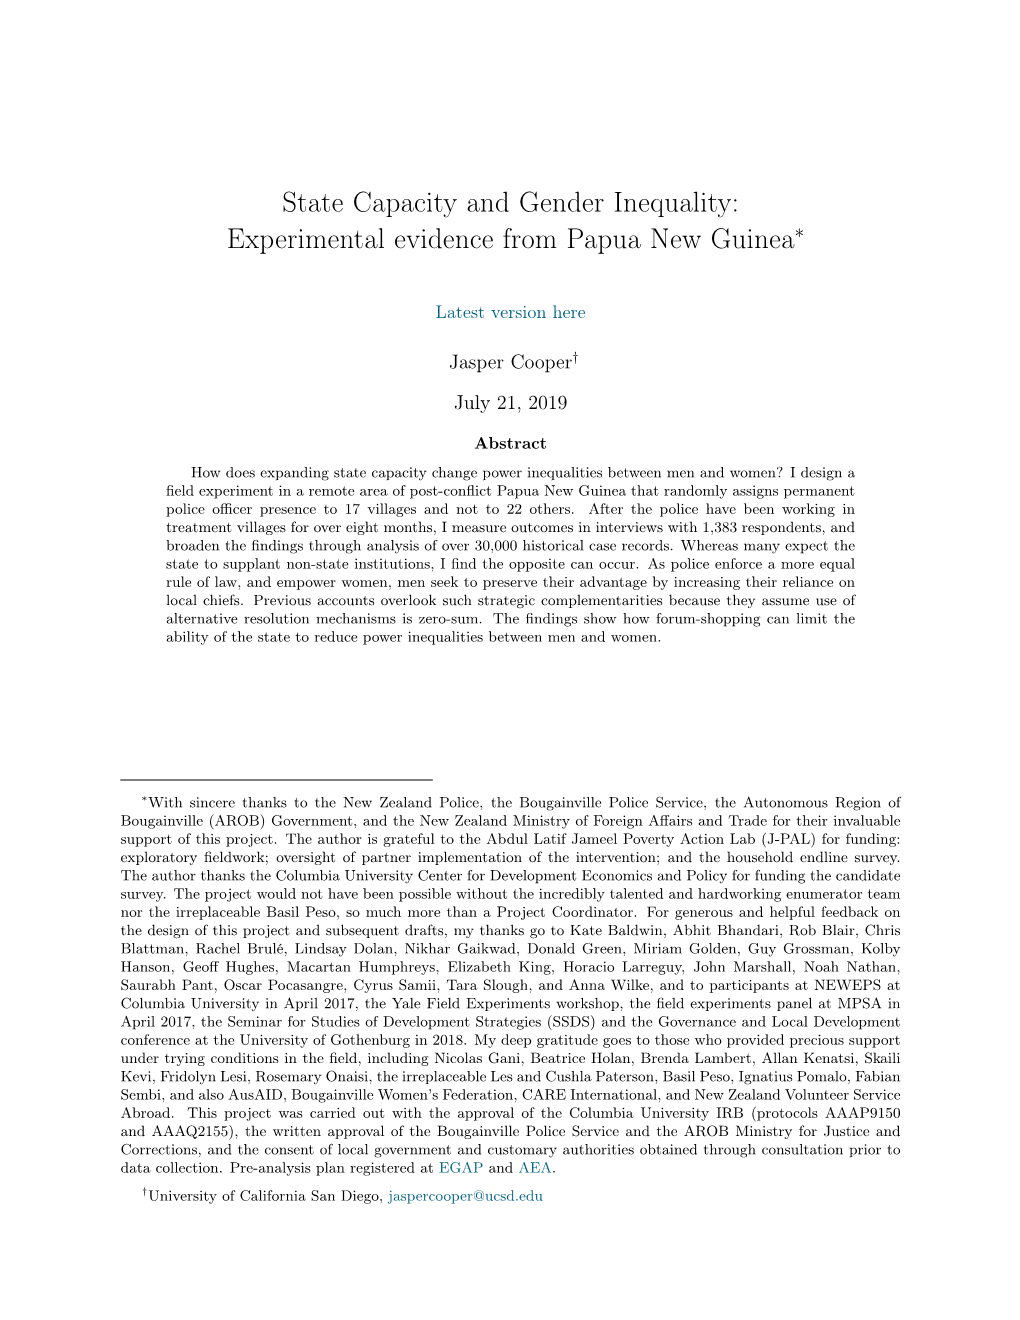 State Capacity and Gender Inequality: Experimental Evidence from Papua New Guinea∗